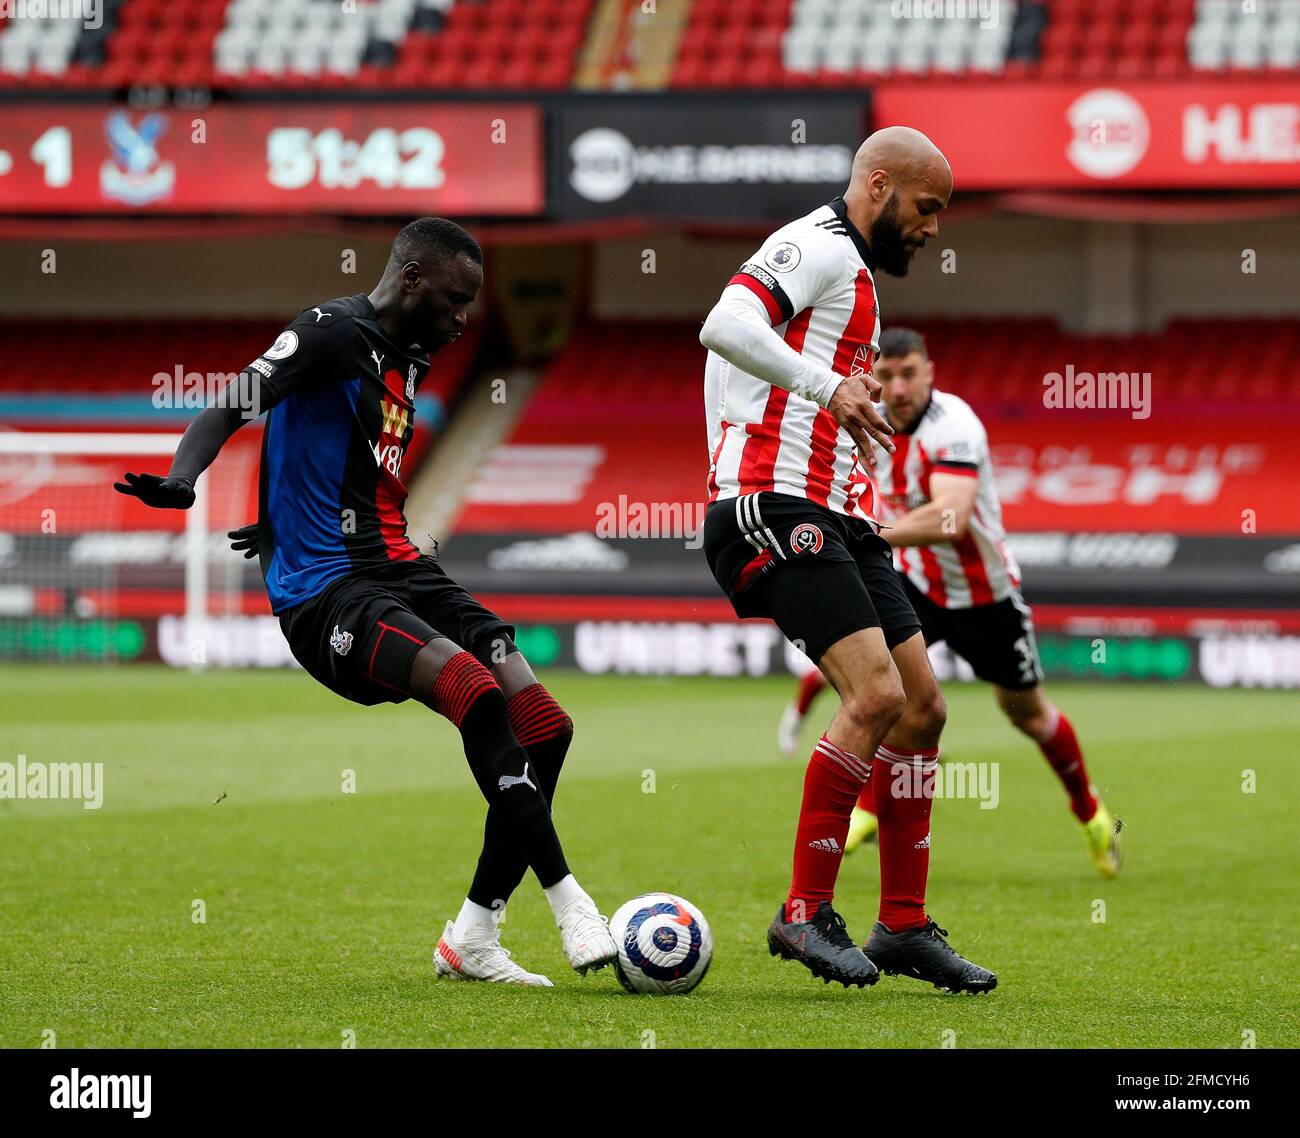 Sheffield, England, 8th May 2021. David McGoldrick of Sheffield Utd tussles with Chikhou Kouyate of Crystal Palace during the Premier League match at Bramall Lane, Sheffield. Picture credit should read: Darren Staples / Sportimage Stock Photo